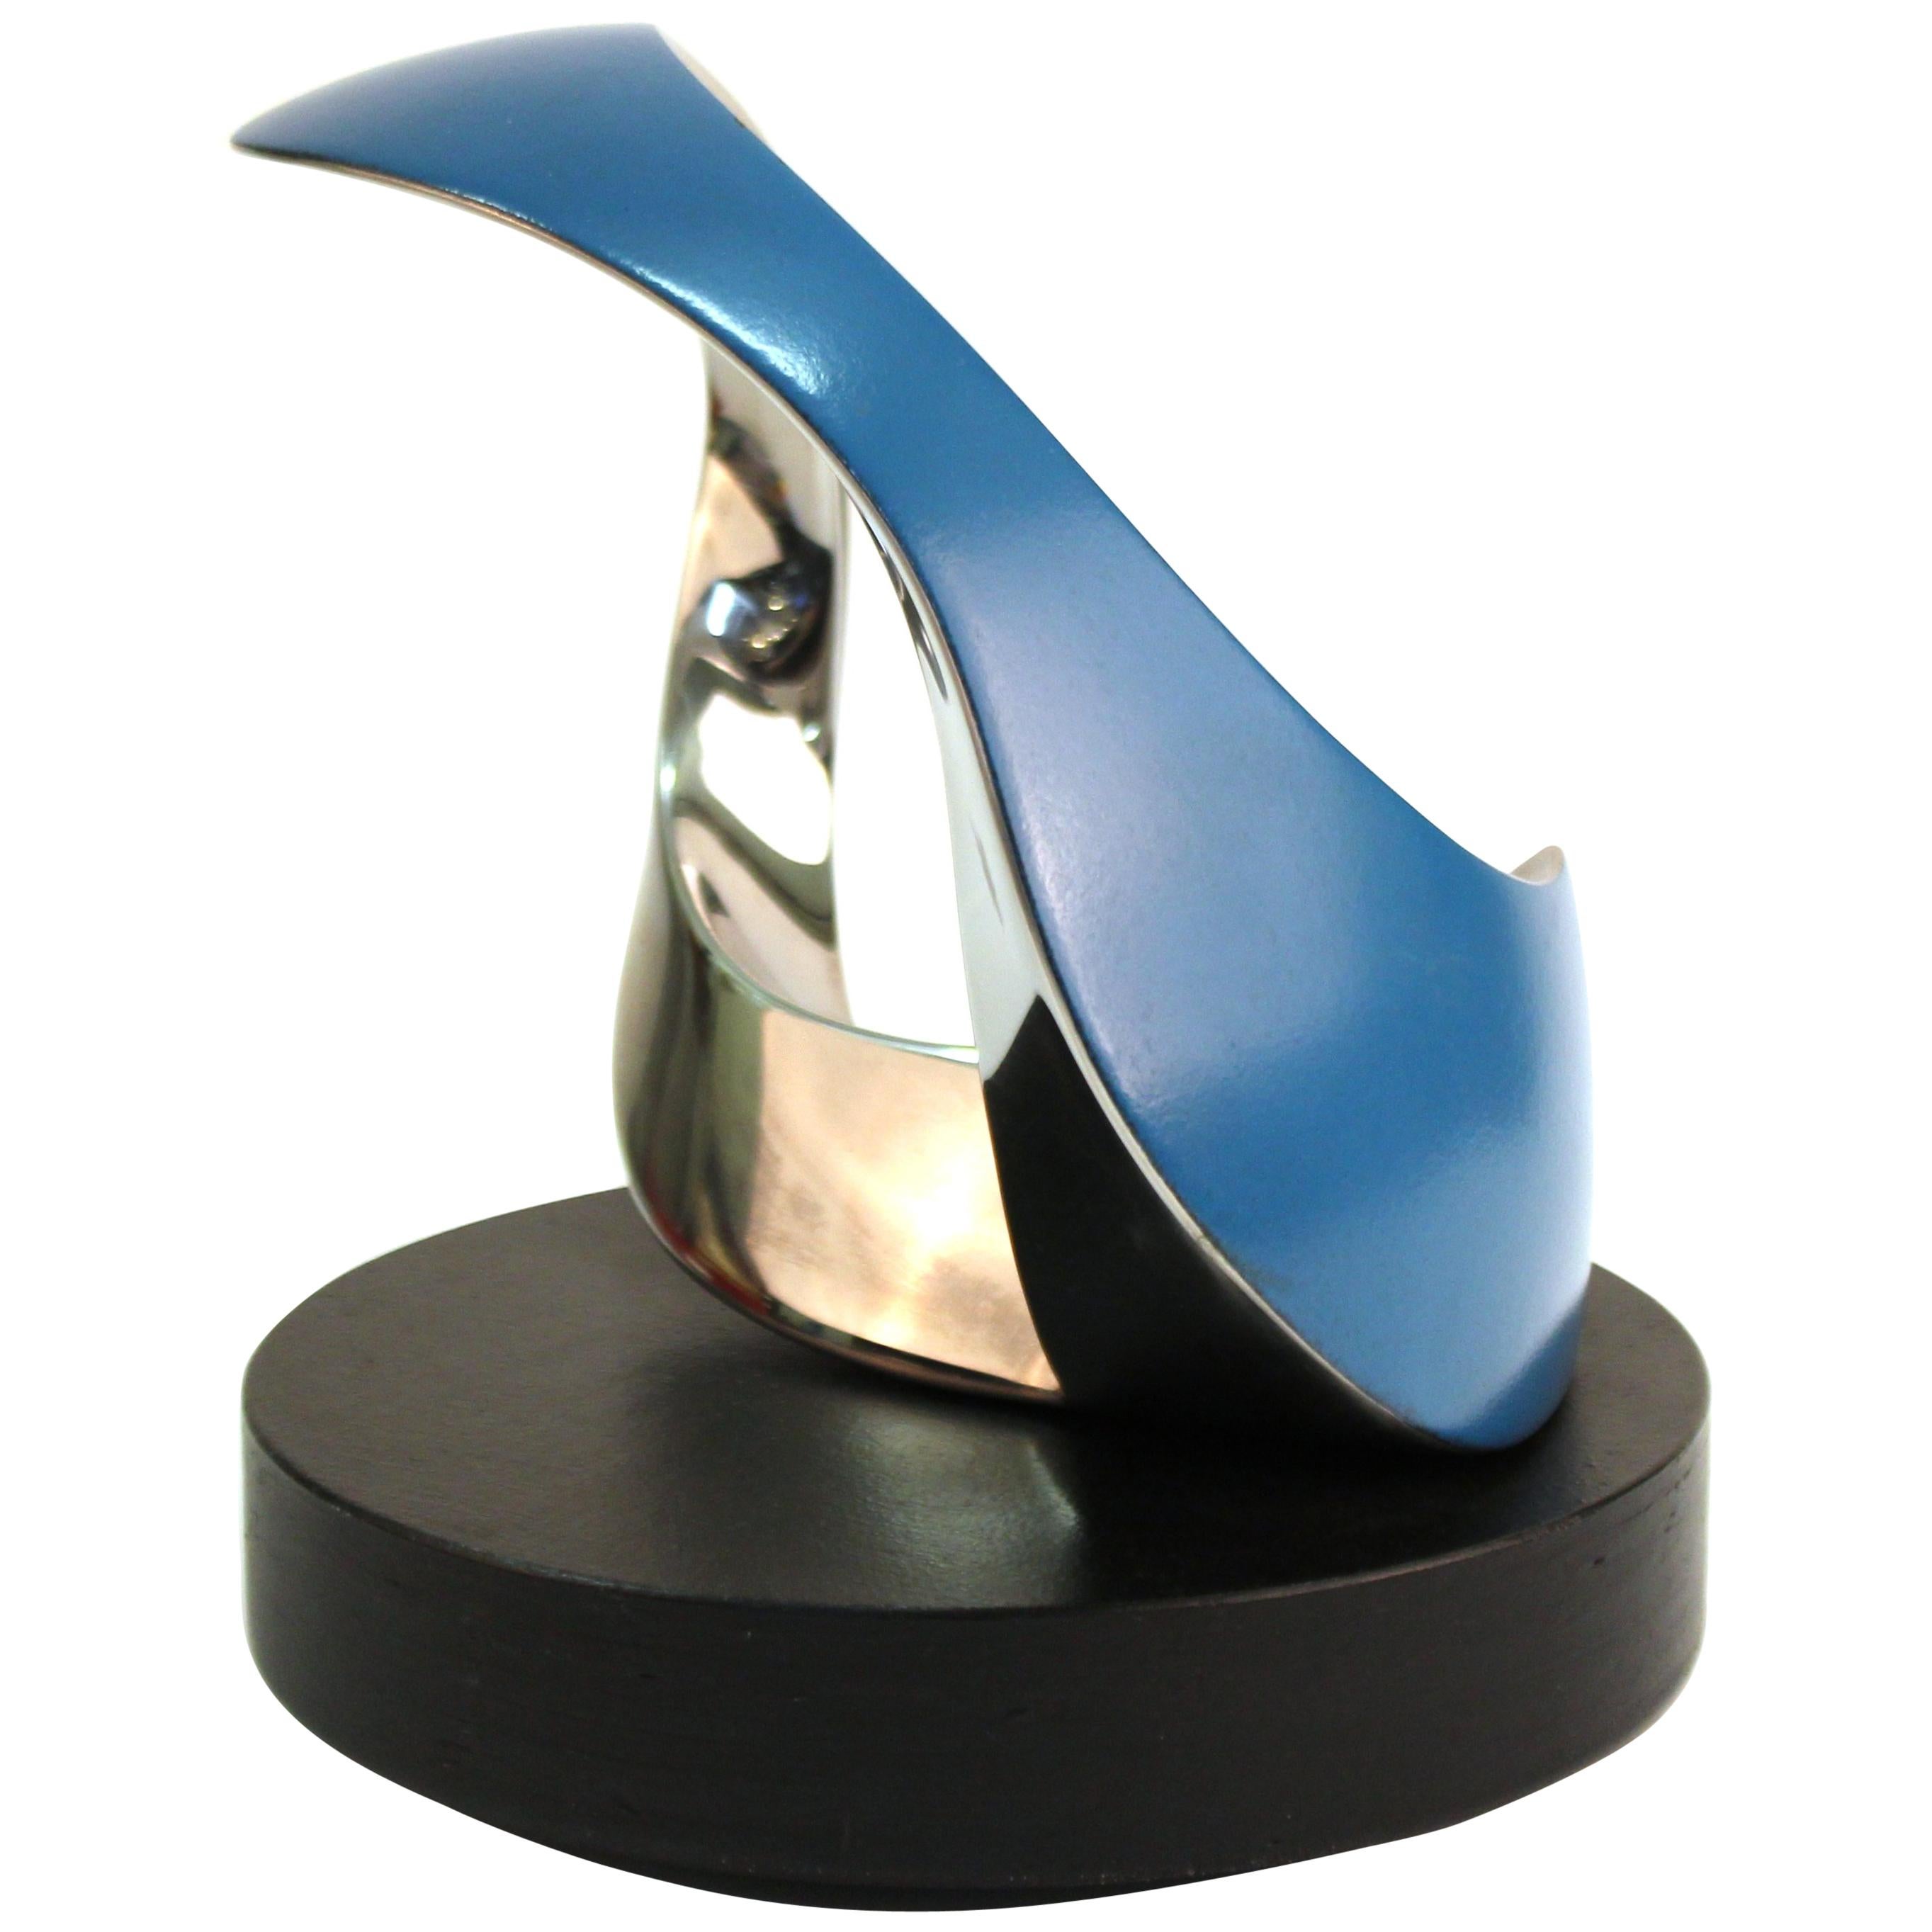 Modern metal abstract sculpture with partial blue coating by Todd Reuben, on rotating base, marked 'Sculpture 45'. Marked on the base 'Sculpture 45 - Todd Reuben - 7 30 95'. The piece is in great vintage condition with age-appropriate wear.